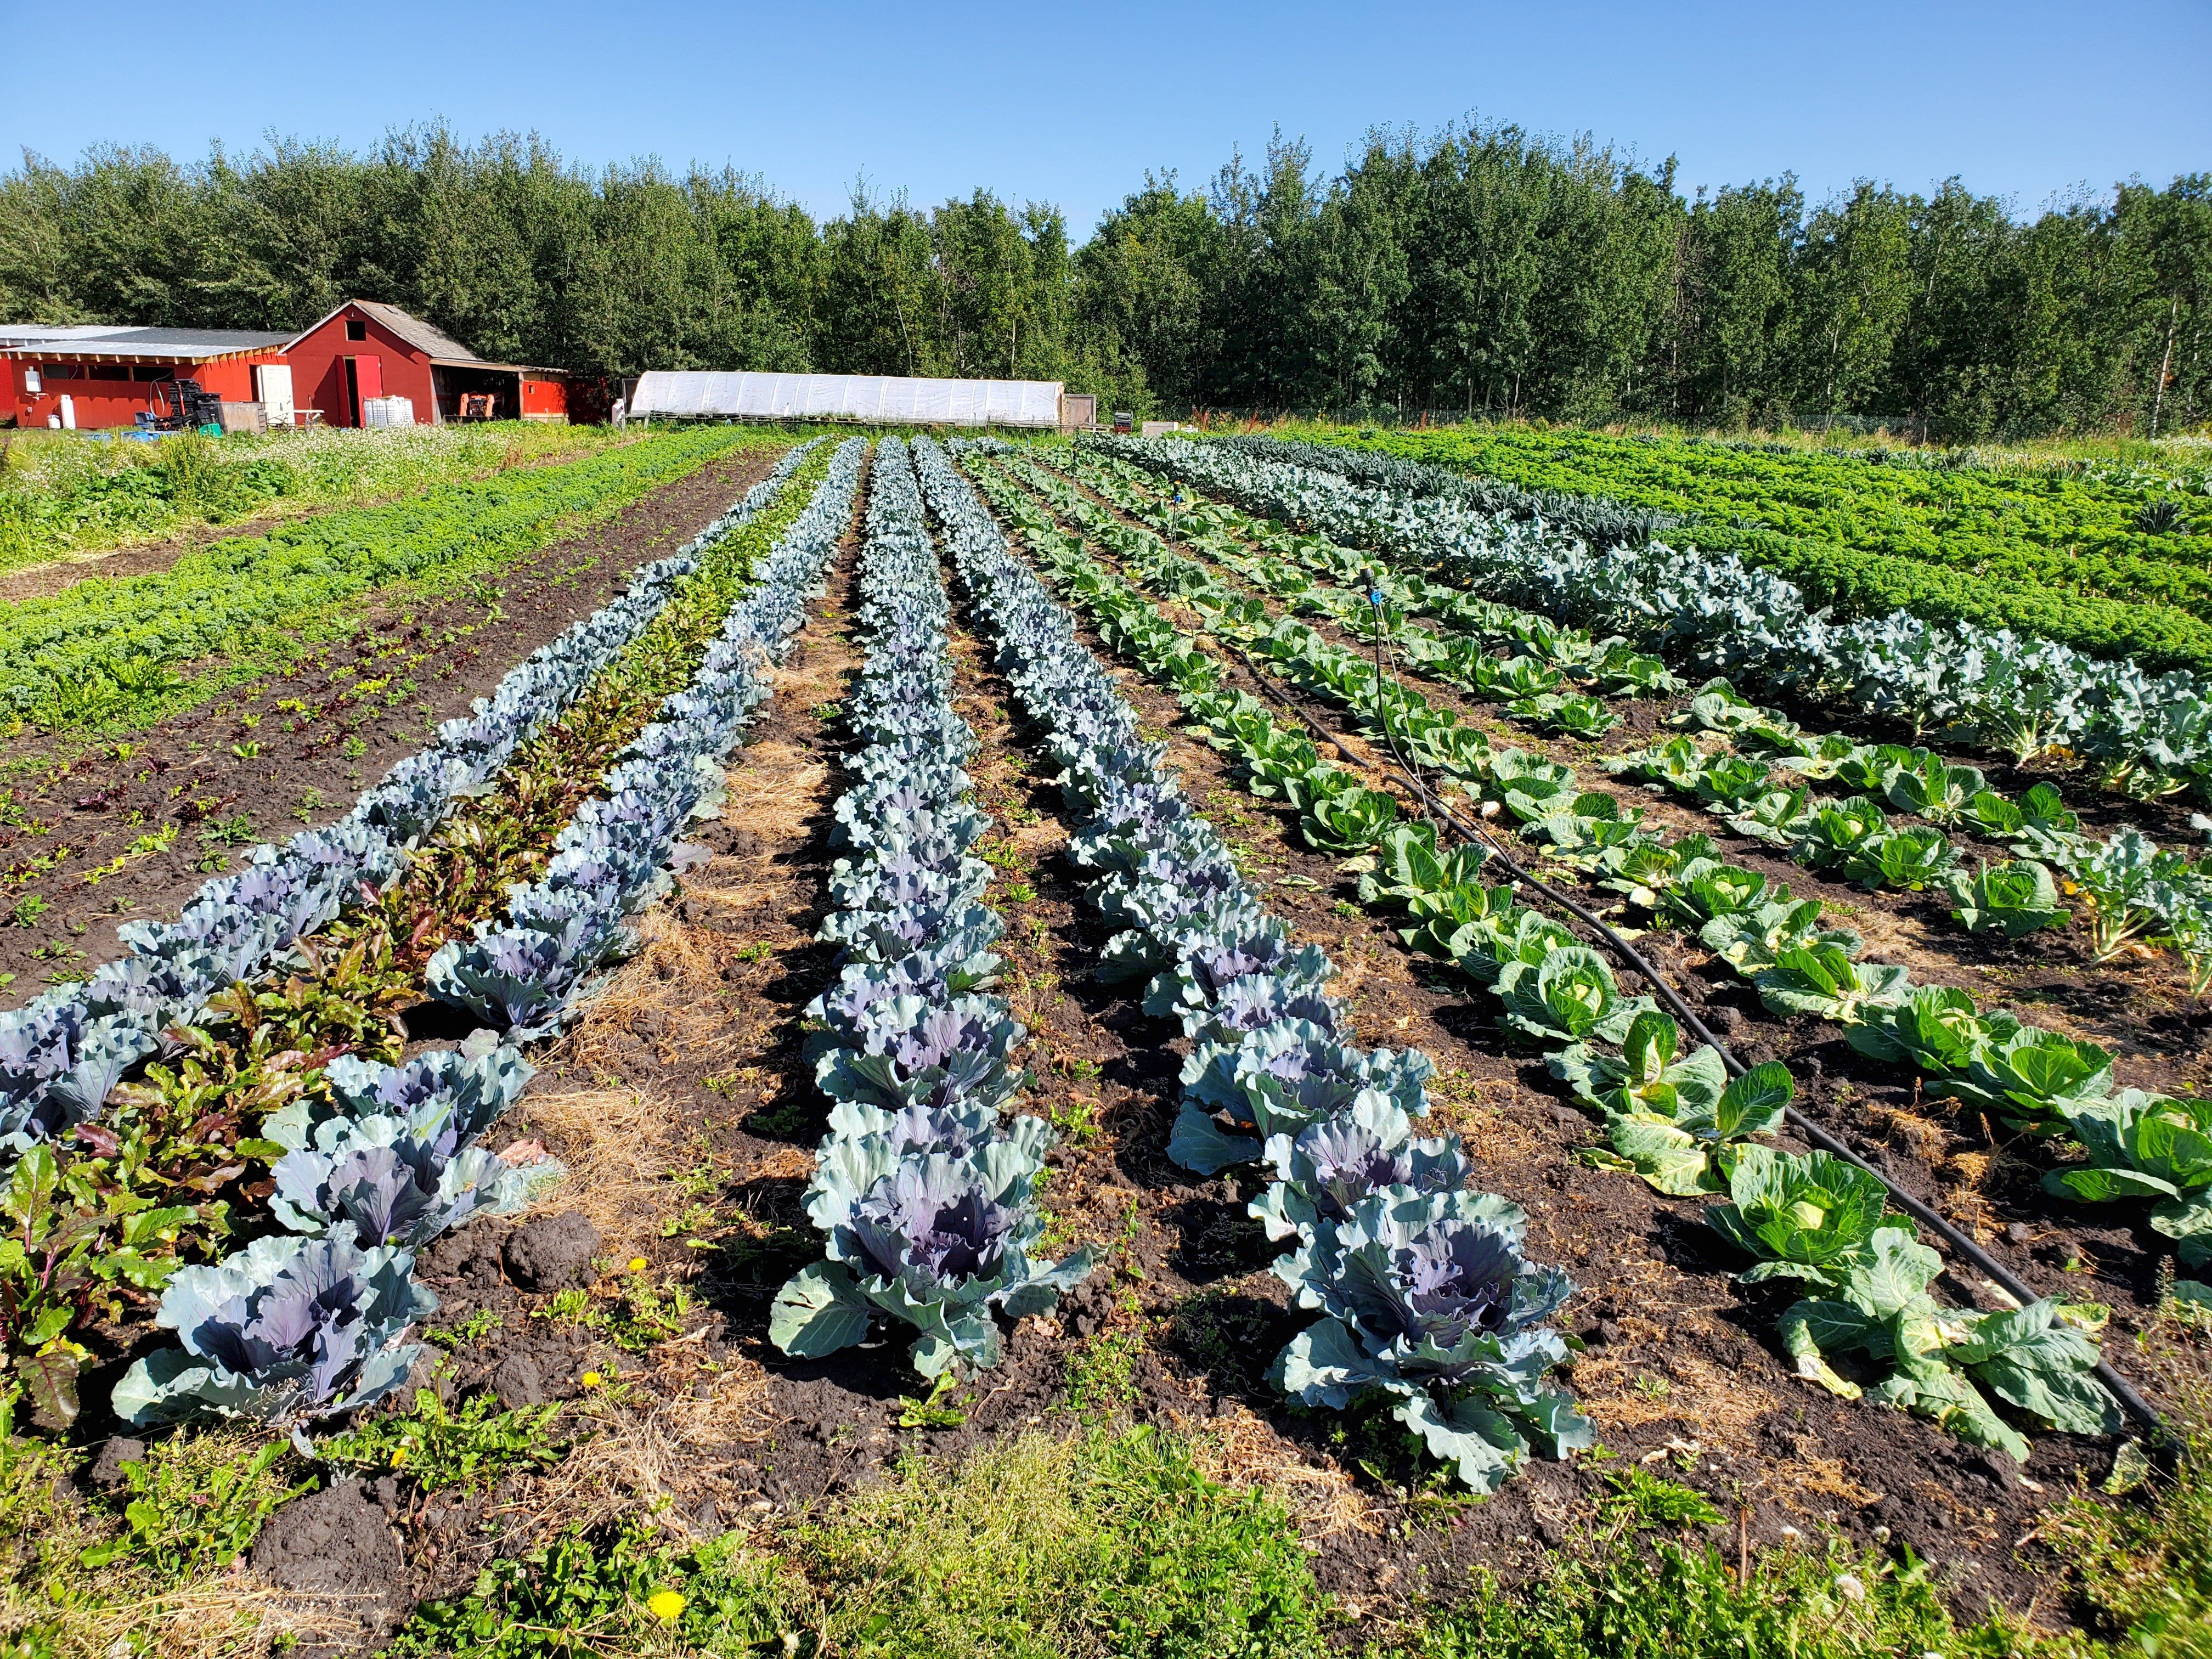 Previous Happening: Farm Happenings for August 18, 2020